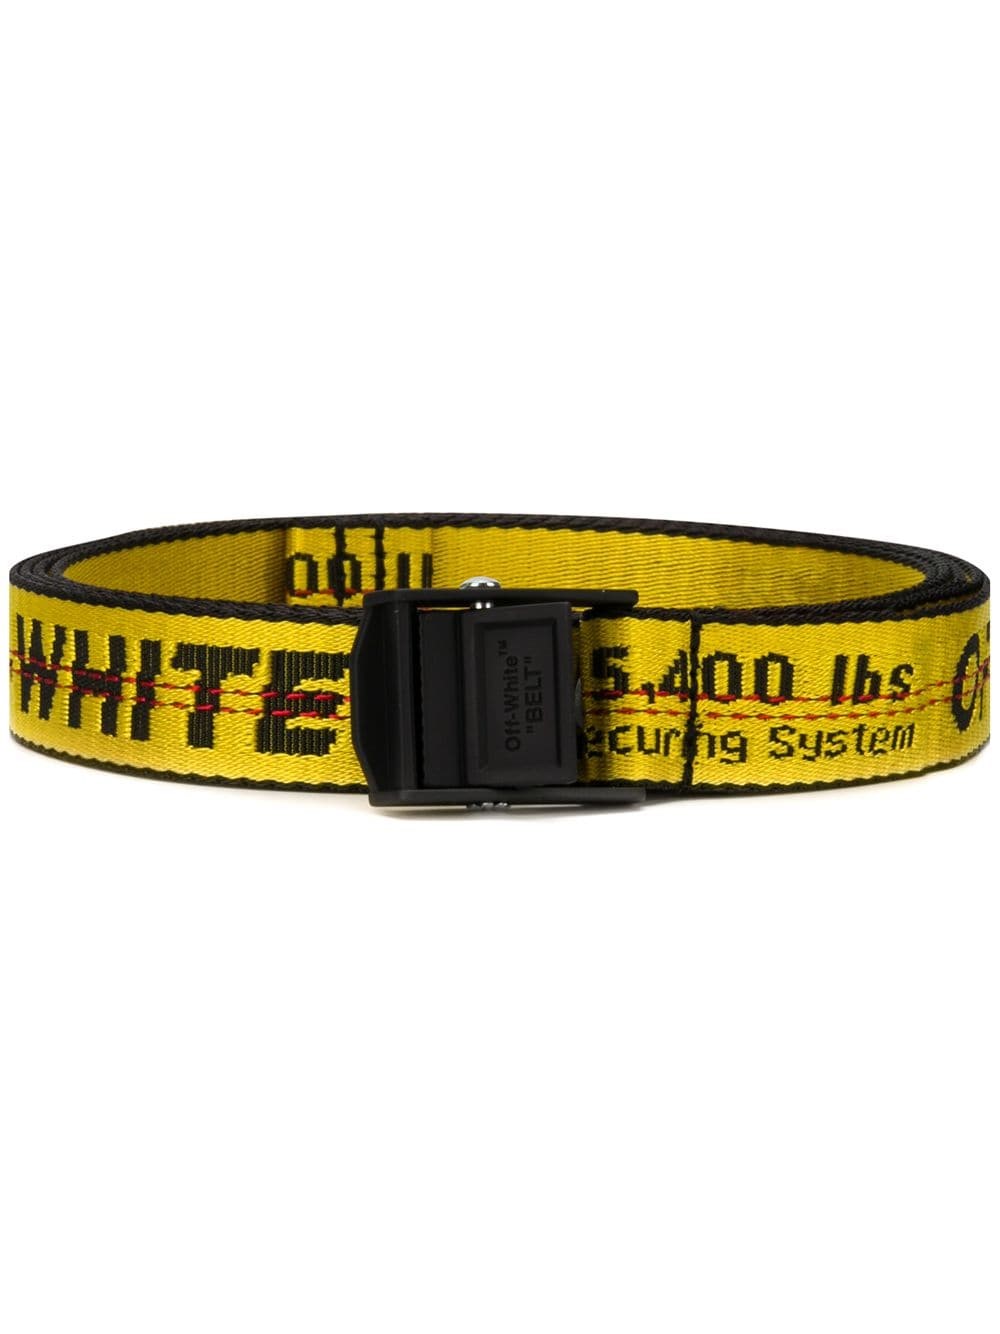 off-white MINI INDUSTRIAL BELT available on www.semadata.org - 32401